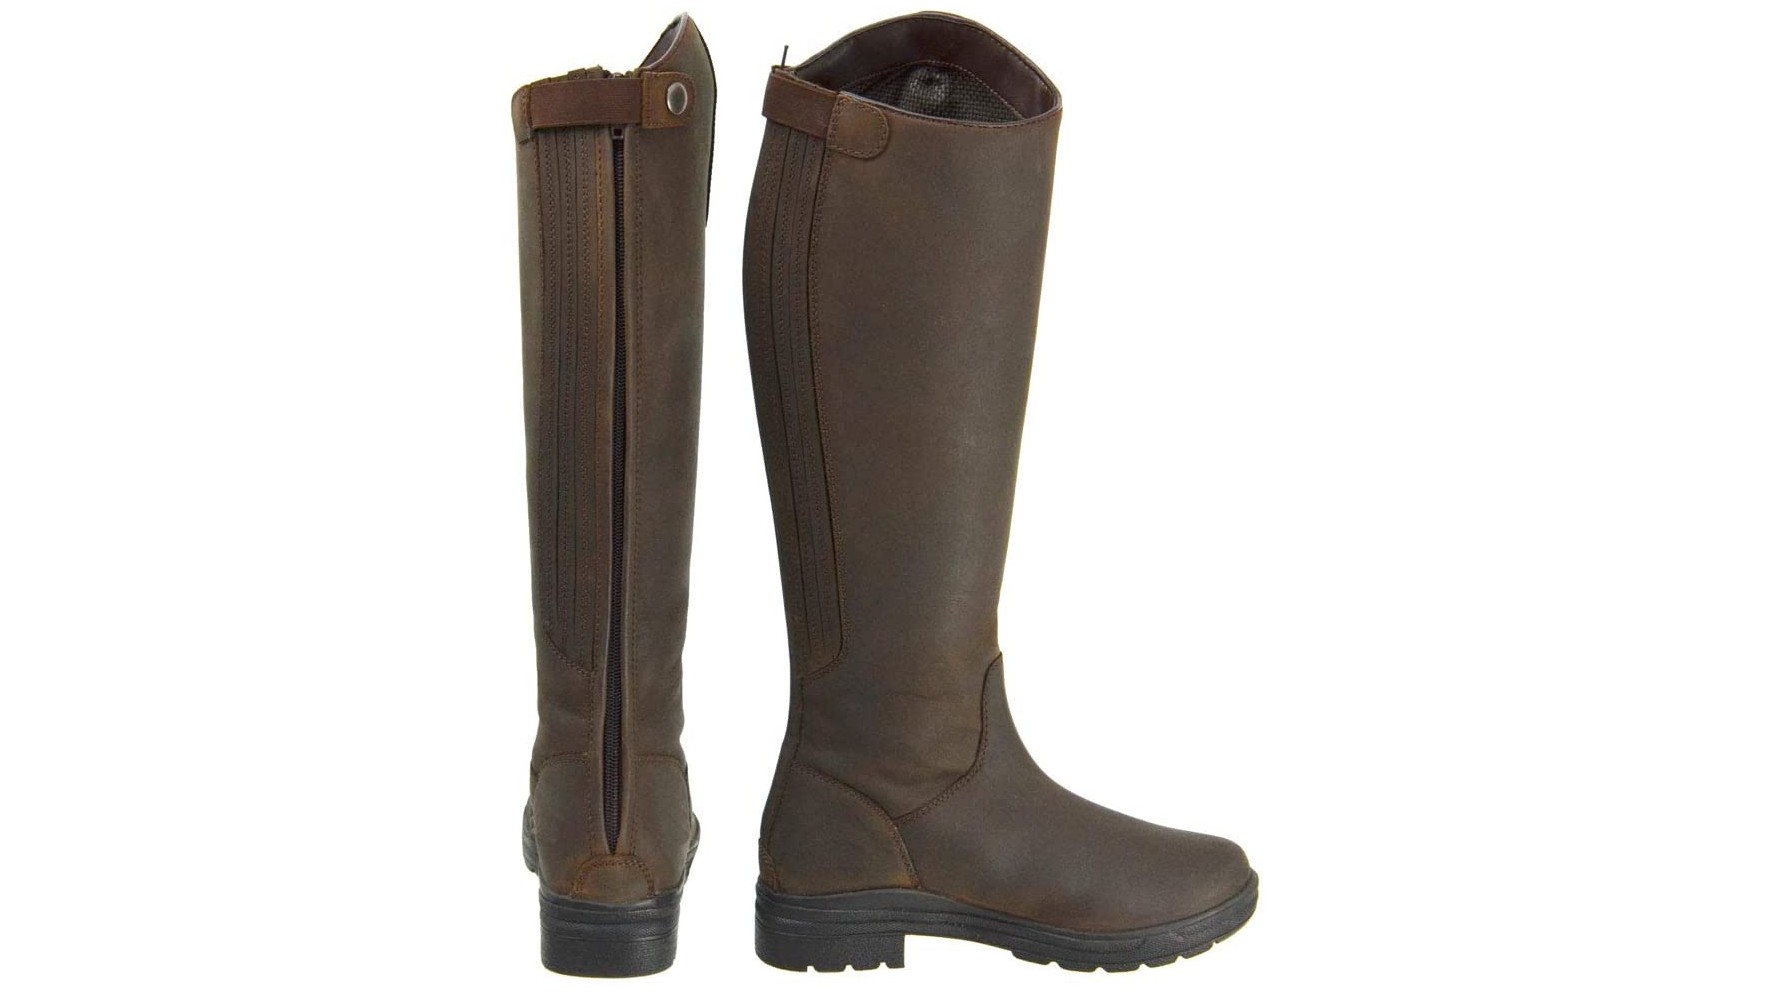 Best riding boots: Long or short, find what suits you best | PetsRadar